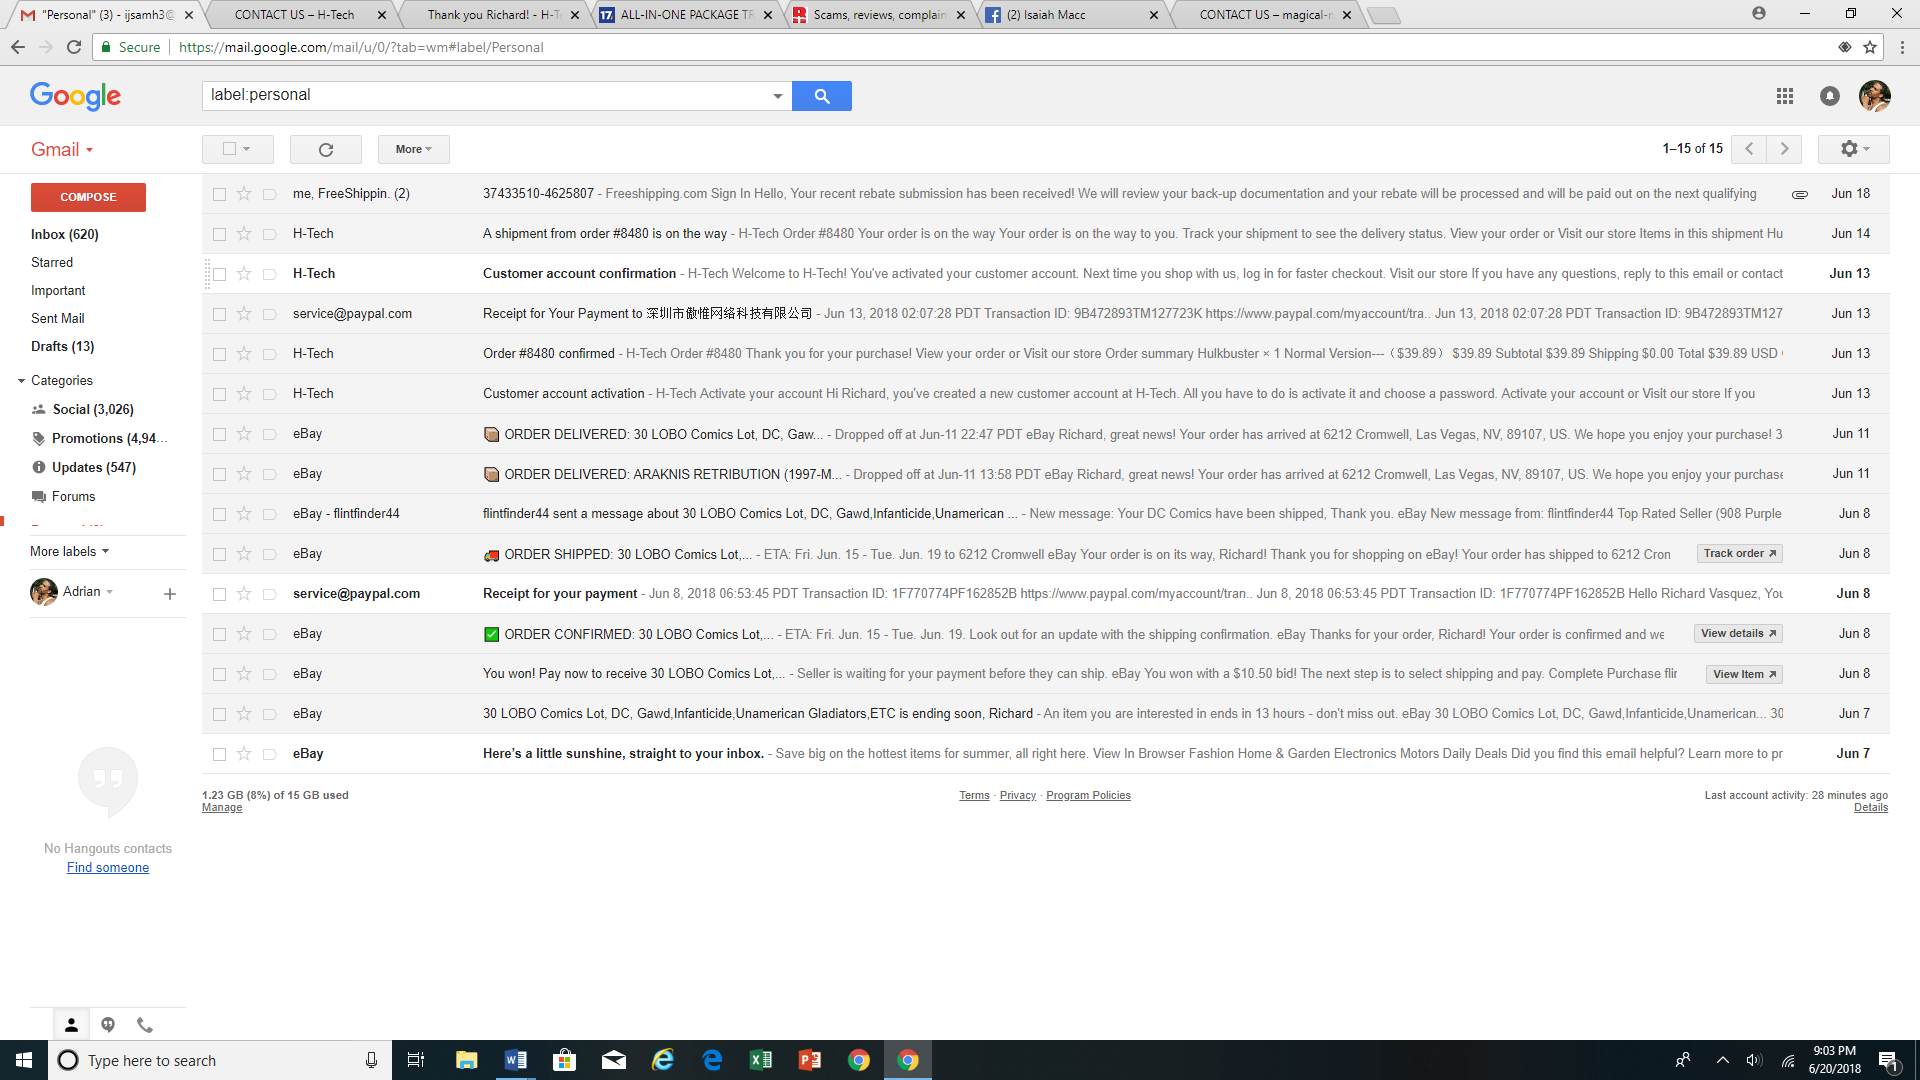 My personal emails of confirmations 